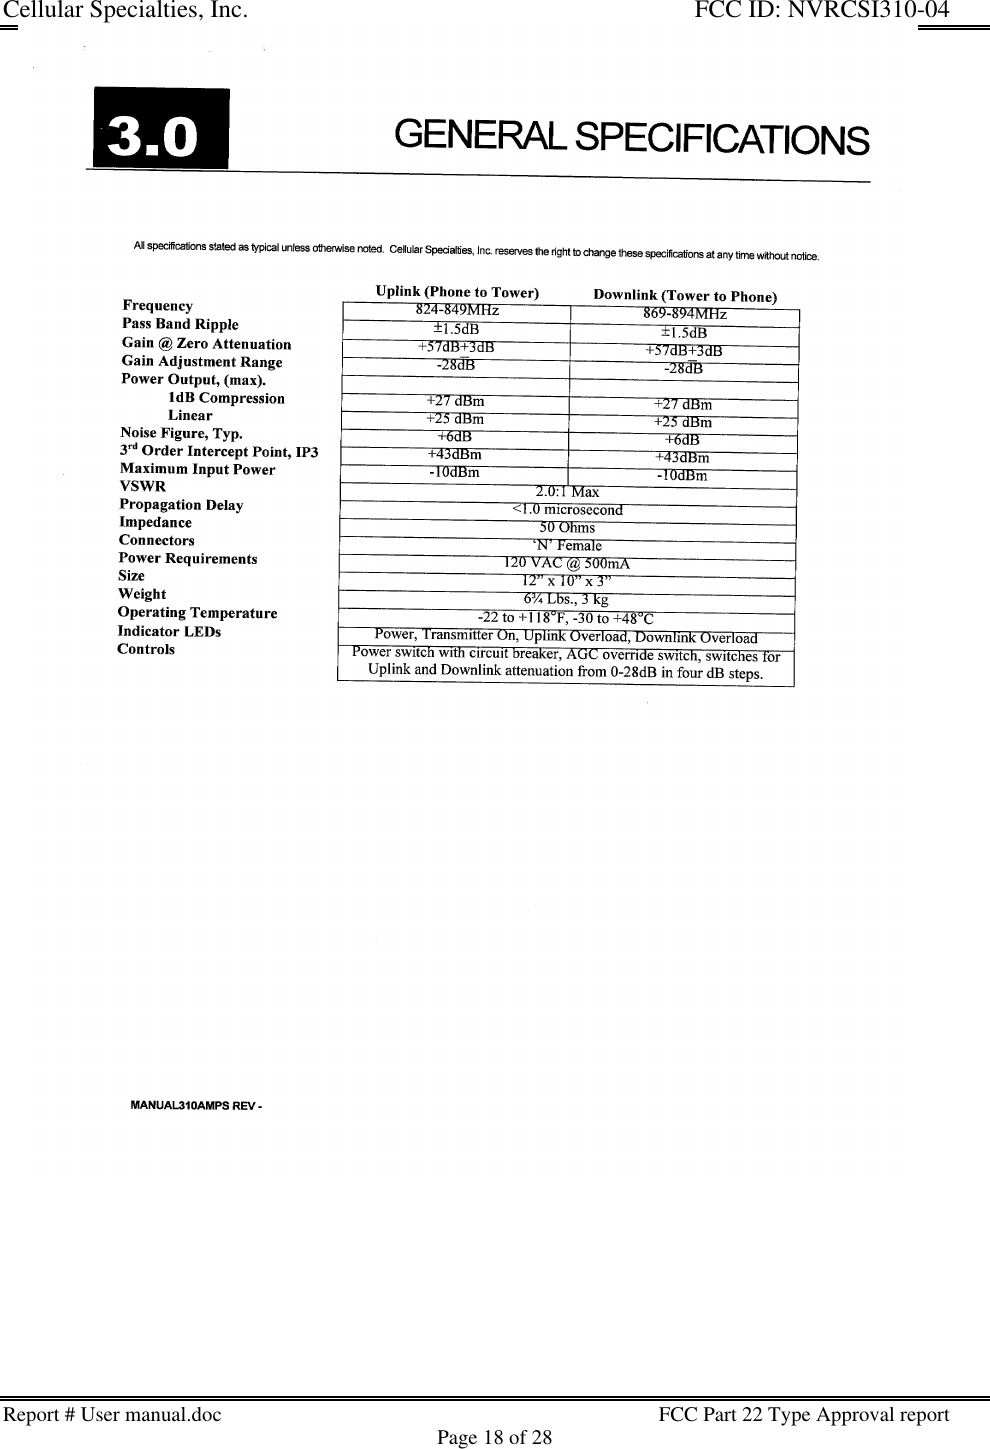 Cellular Specialties, Inc. FCC ID: NVRCSI310-04Report # User manual.doc FCC Part 22 Type Approval reportPage 18 of 28